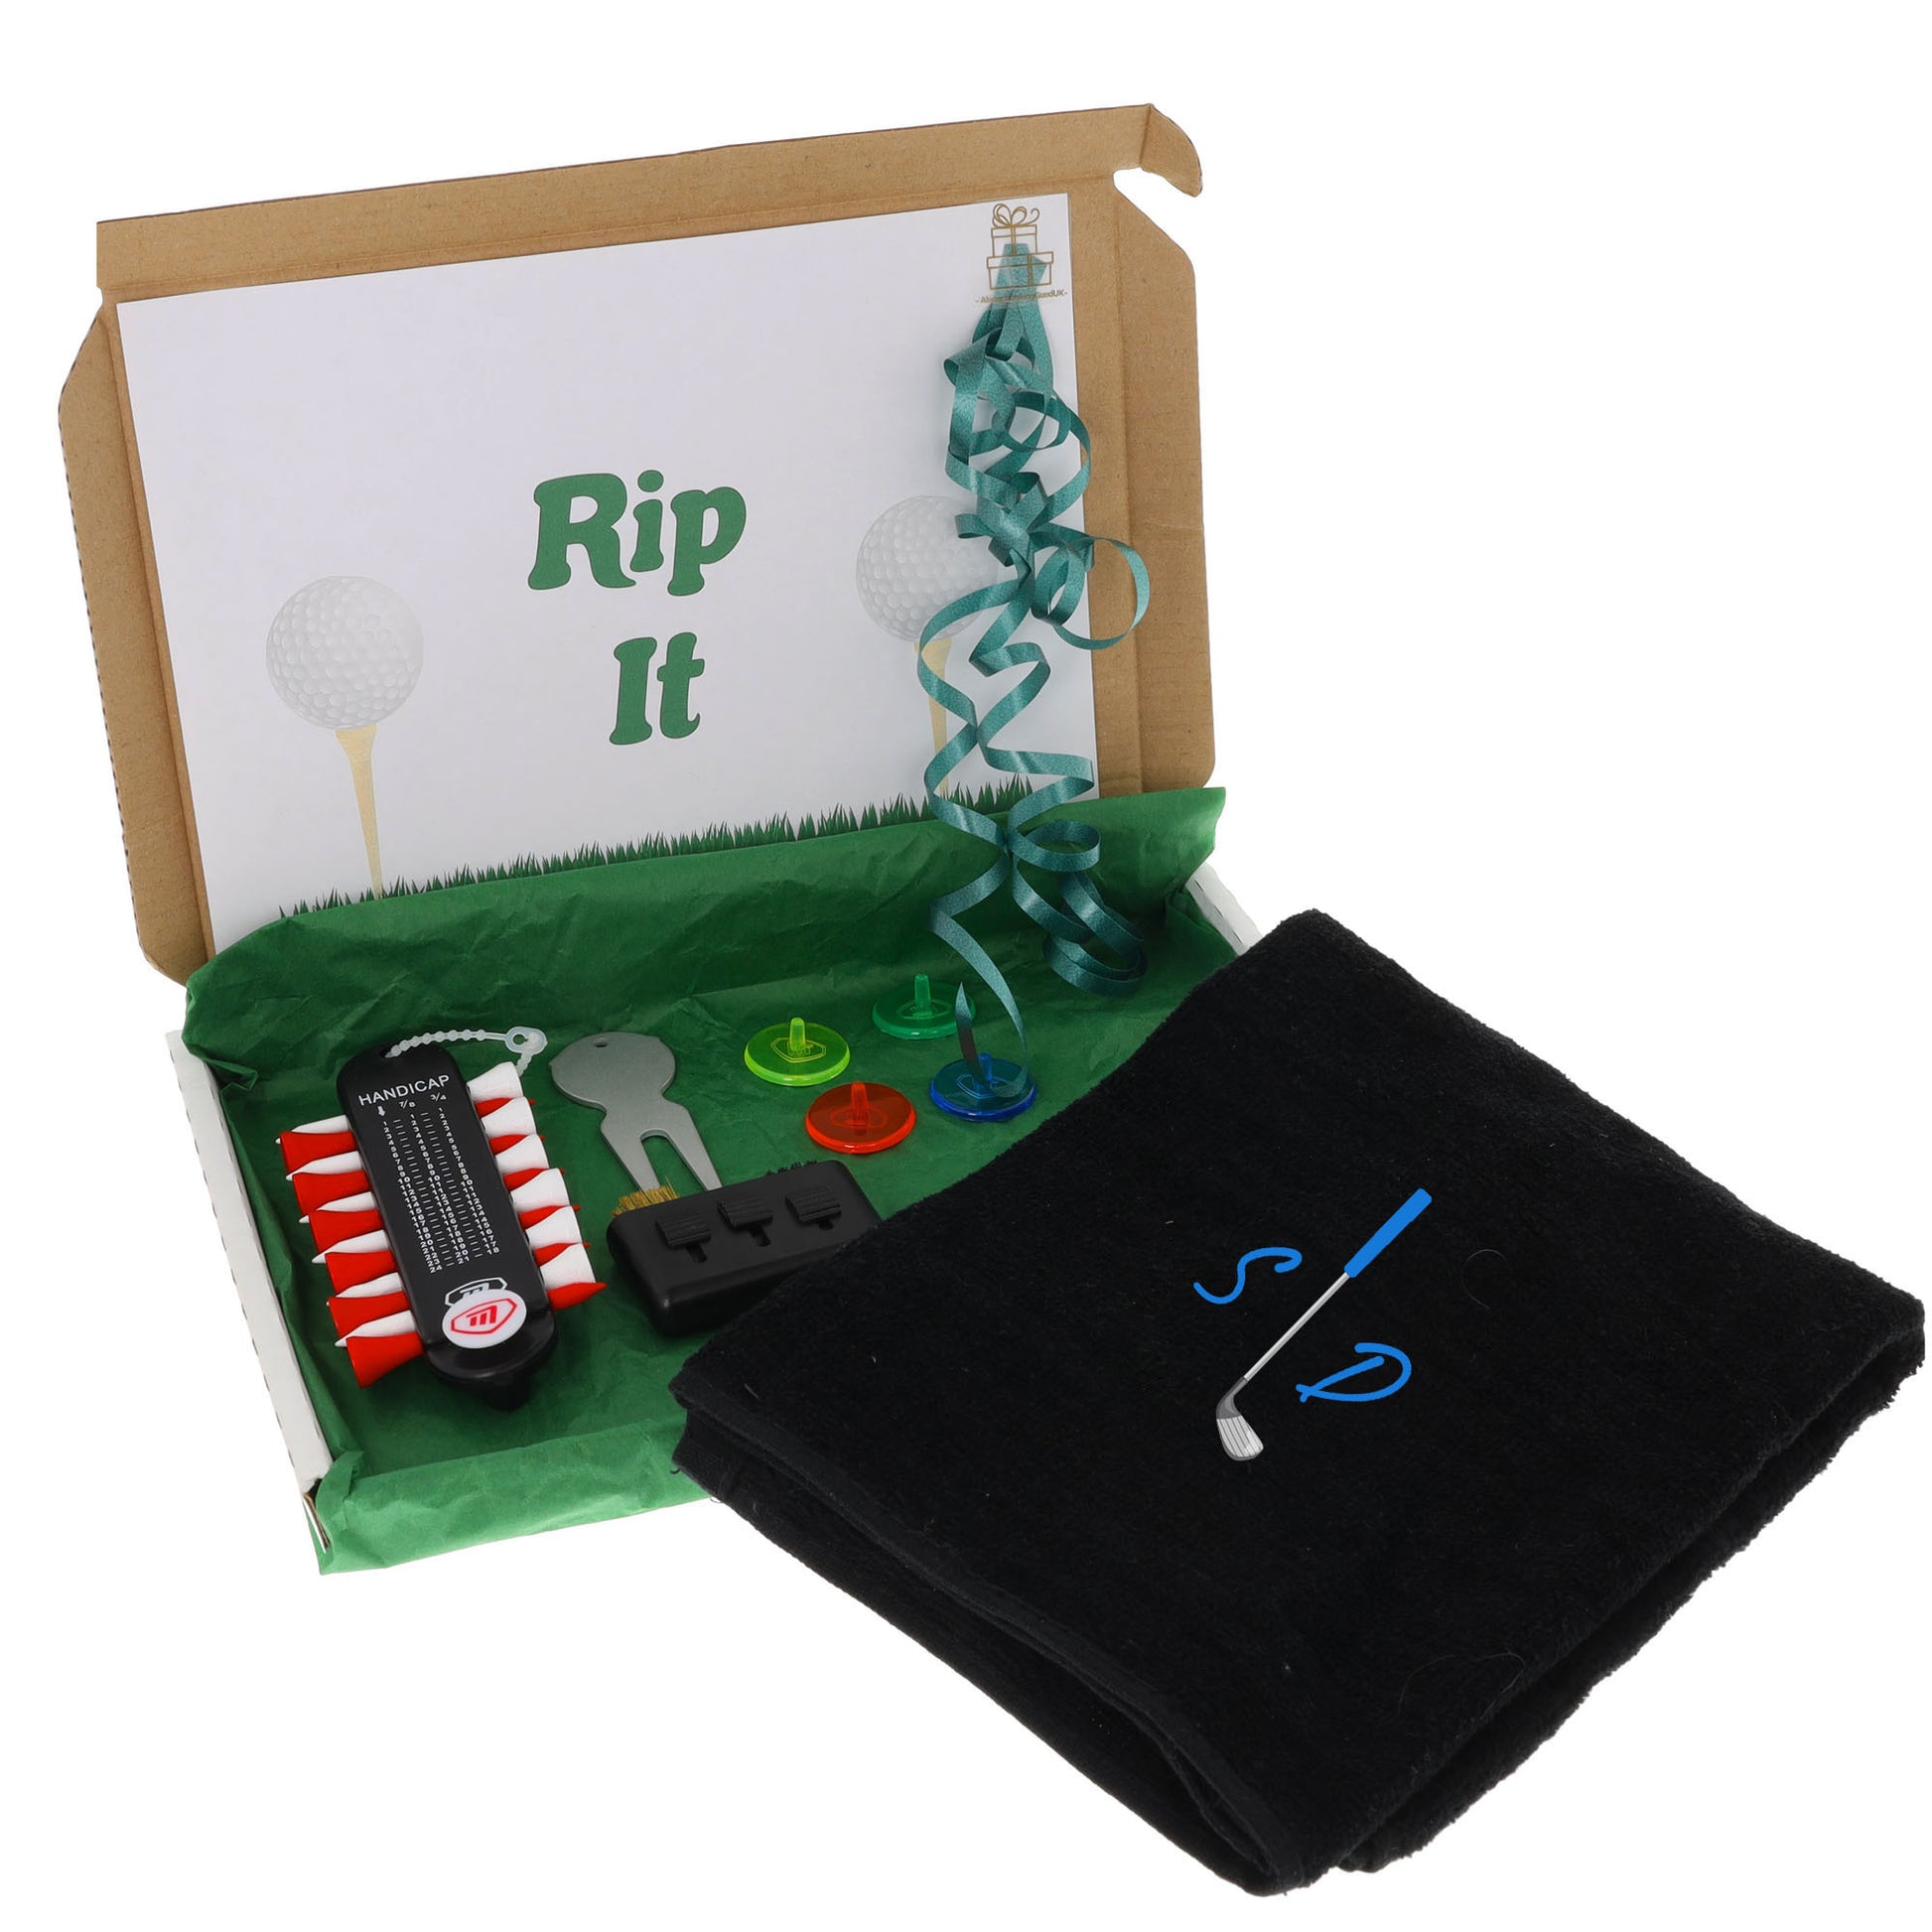 Personalised Embroidered Golf Club Design Towel & Accessories Letterbox Gift  - Always Looking Good -   